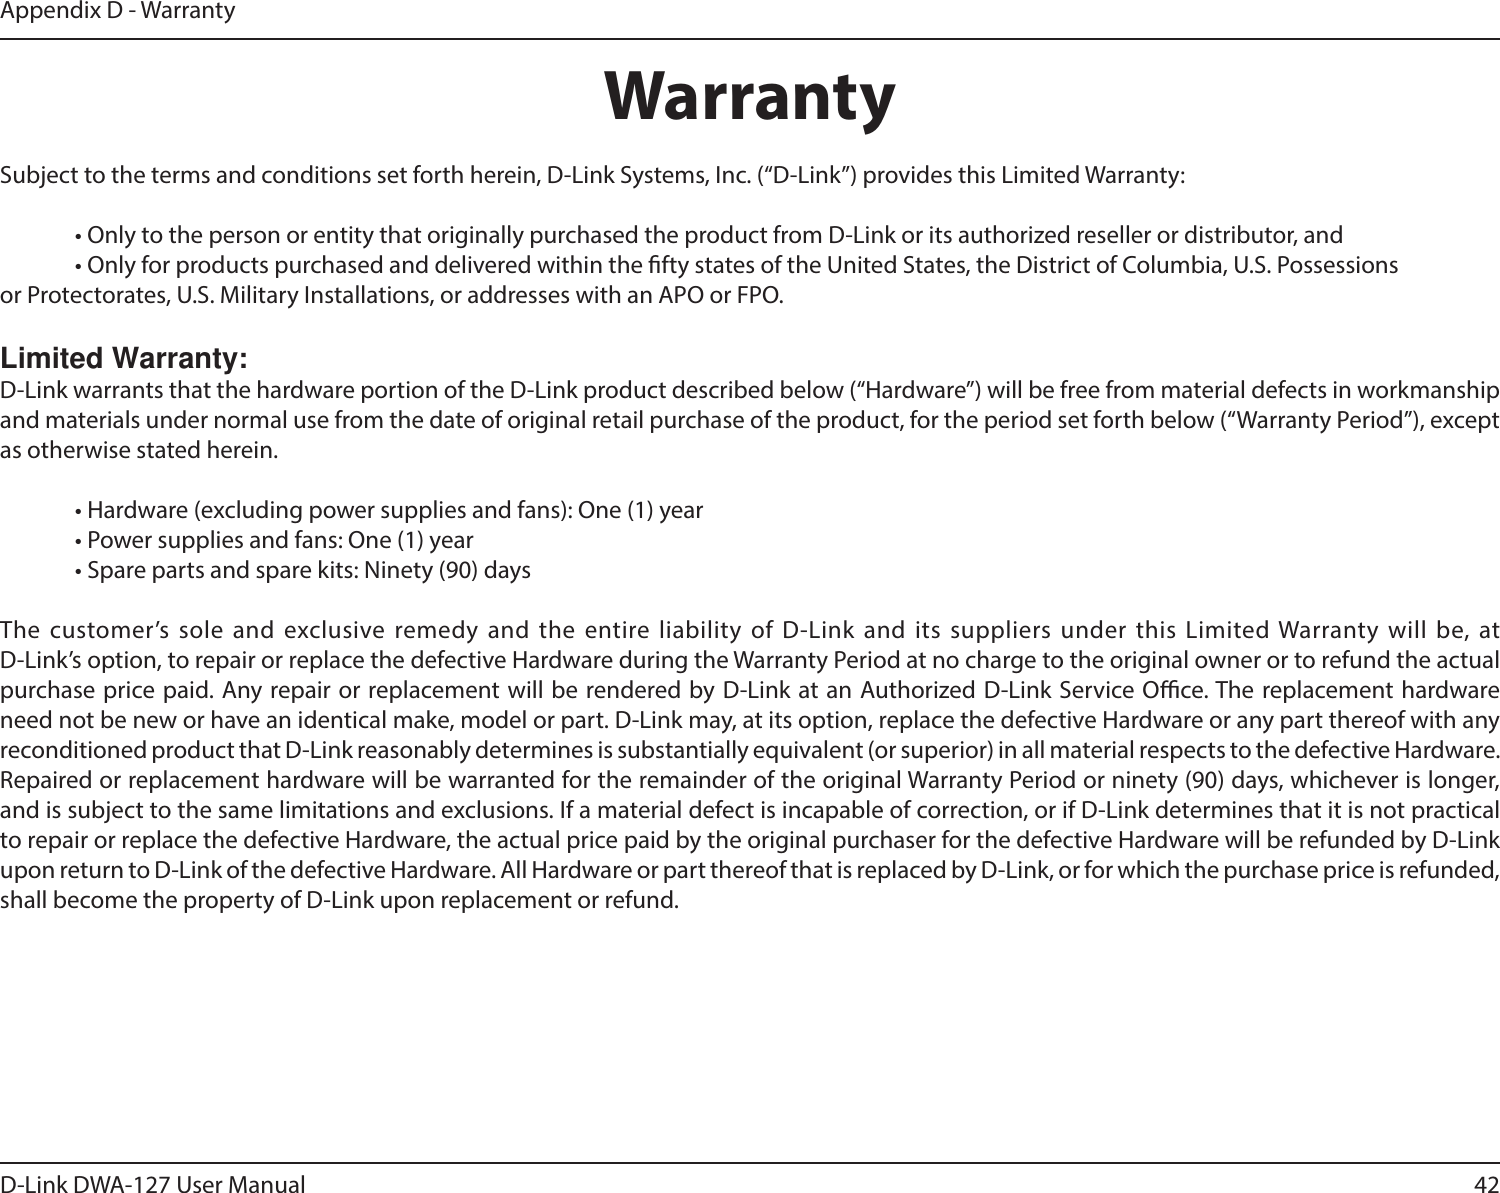 42D-Link DWA-127 User ManualAppendix D - WarrantyWarrantySubject to the terms and conditions set forth herein, D-Link Systems, Inc. (“D-Link”) provides this Limited Warranty:  • Only to the person or entity that originally purchased the product from D-Link or its authorized reseller or distributor, and  • Only for products purchased and delivered within the fty states of the United States, the District of Columbia, U.S. Possessions       or Protectorates, U.S. Military Installations, or addresses with an APO or FPO.Limited Warranty:D-Link warrants that the hardware portion of the D-Link product described below (“Hardware”) will be free from material defects in workmanship and materials under normal use from the date of original retail purchase of the product, for the period set forth below (“Warranty Period”), except as otherwise stated herein.  • Hardware (excluding power supplies and fans): One (1) year  • Power supplies and fans: One (1) year  • Spare parts and spare kits: Ninety (90) daysThe customer’s sole and exclusive remedy and the entire liability of D-Link and its suppliers under this Limited Warranty will be, at  D-Link’s option, to repair or replace the defective Hardware during the Warranty Period at no charge to the original owner or to refund the actual purchase price paid. Any repair or replacement will be rendered by D-Link at an Authorized D-Link Service Oce. The replacement hardware need not be new or have an identical make, model or part. D-Link may, at its option, replace the defective Hardware or any part thereof with any reconditioned product that D-Link reasonably determines is substantially equivalent (or superior) in all material respects to the defective Hardware. Repaired or replacement hardware will be warranted for the remainder of the original Warranty Period or ninety (90) days, whichever is longer, and is subject to the same limitations and exclusions. If a material defect is incapable of correction, or if D-Link determines that it is not practical to repair or replace the defective Hardware, the actual price paid by the original purchaser for the defective Hardware will be refunded by D-Link upon return to D-Link of the defective Hardware. All Hardware or part thereof that is replaced by D-Link, or for which the purchase price is refunded, shall become the property of D-Link upon replacement or refund.